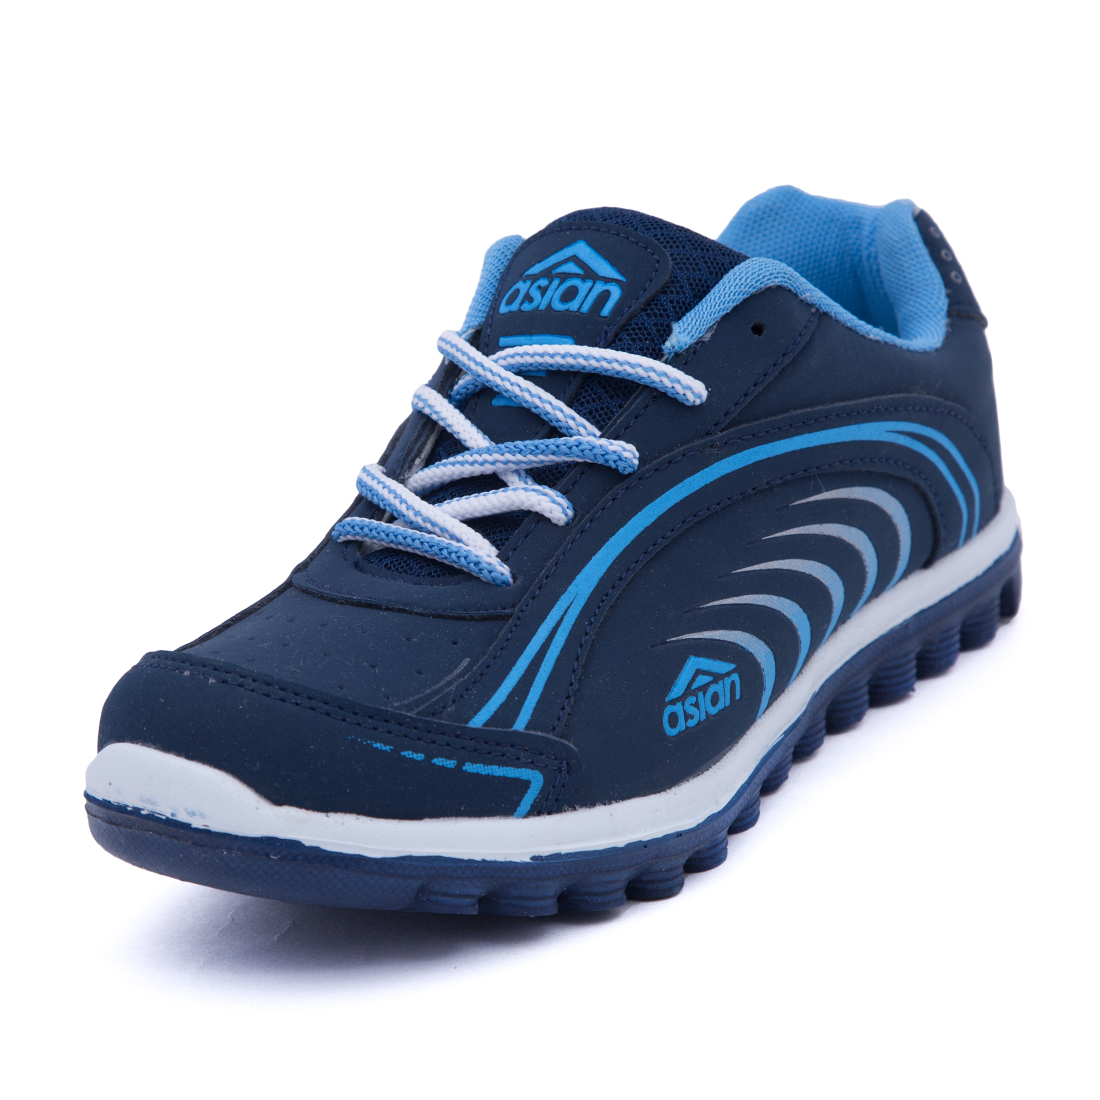 Buy Asian Womens Navy & Sky Blue Sports Shoes Online @ ₹499 from ShopClues